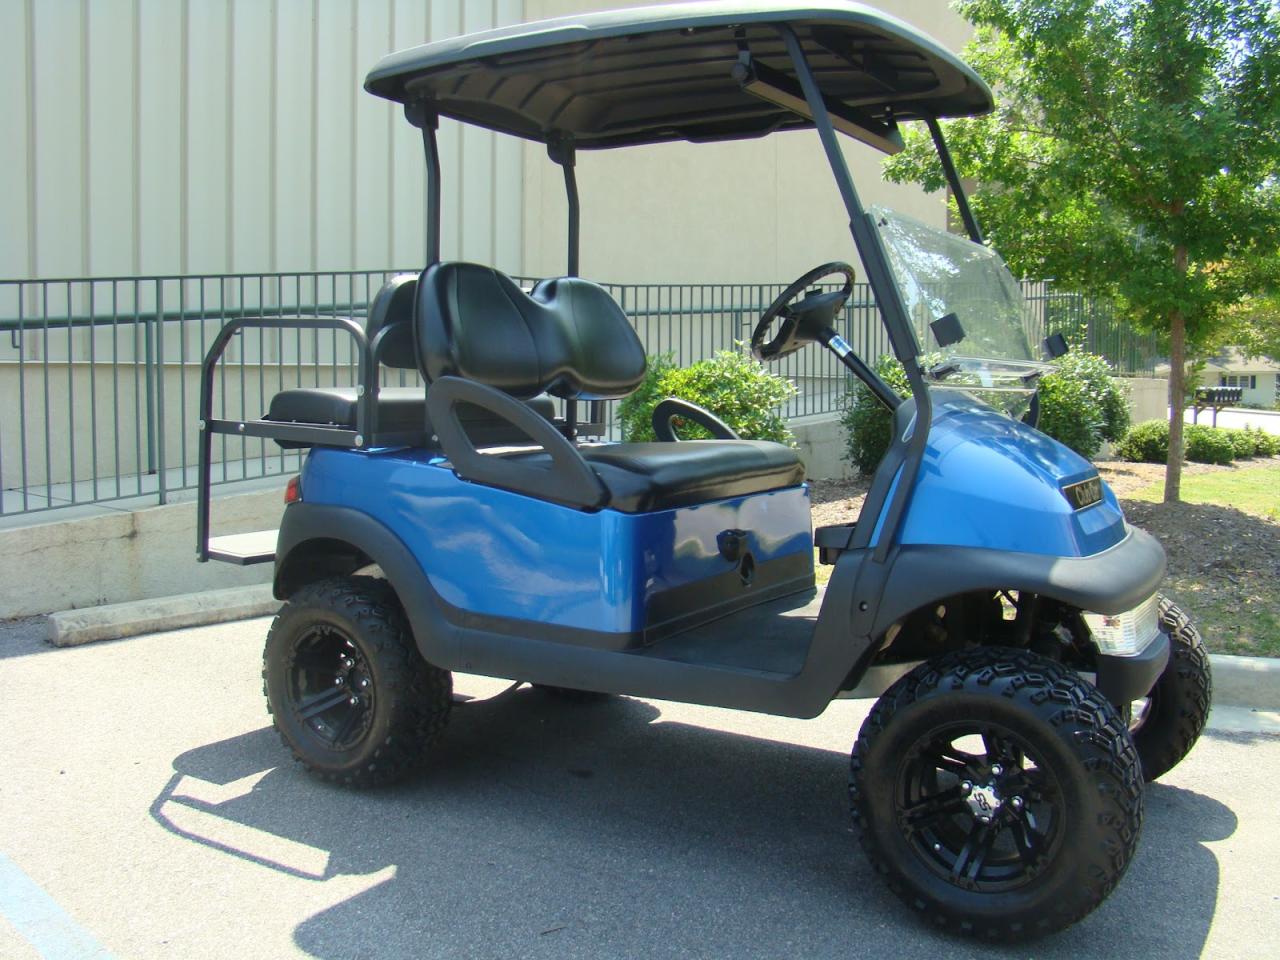 Used Golf Carts for Sale by Owner in Wright, Iowa: Your Guide to a Smooth Purchase